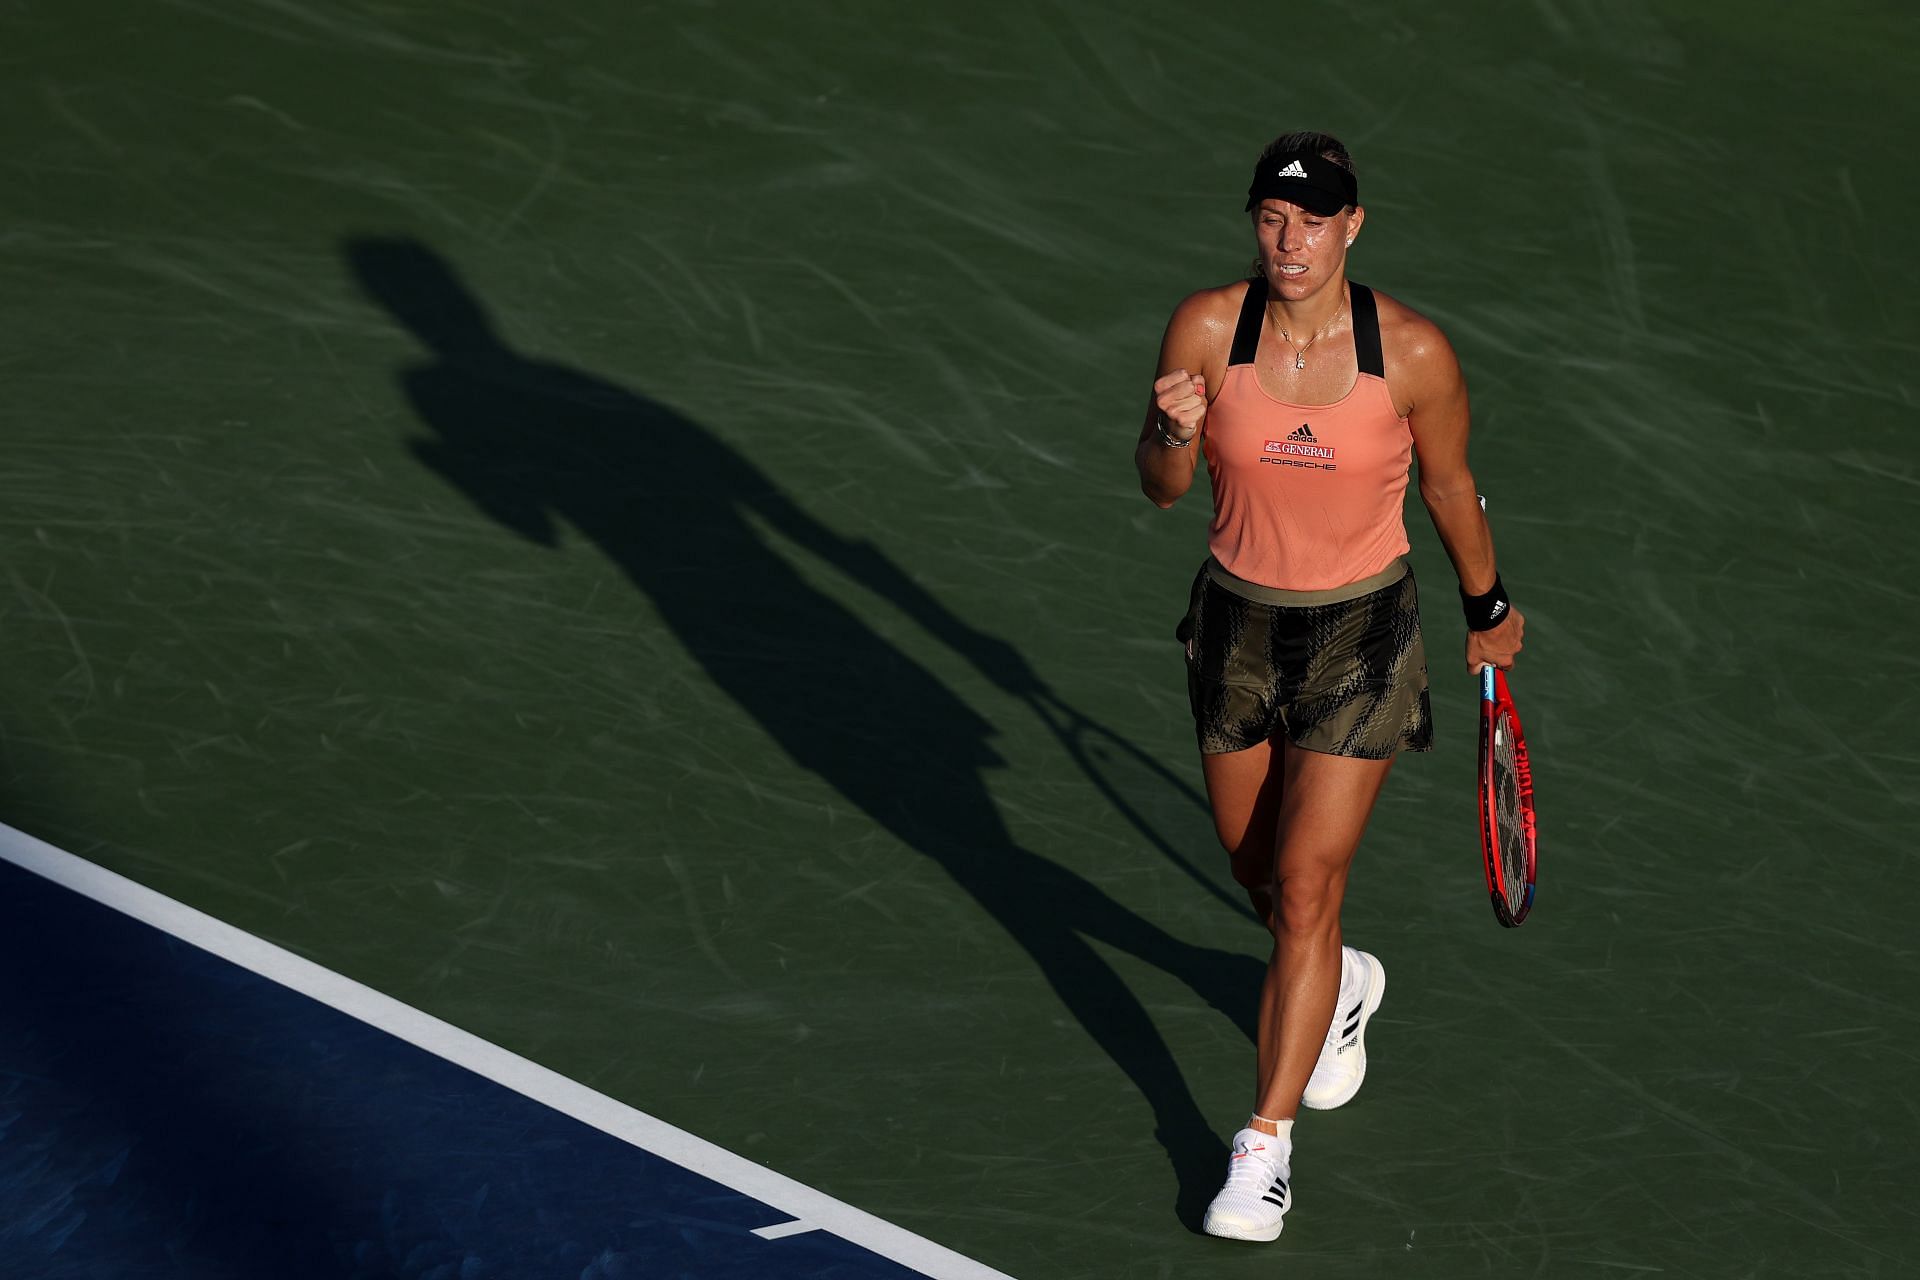 Angelique Kerber at the 2021 US Open.